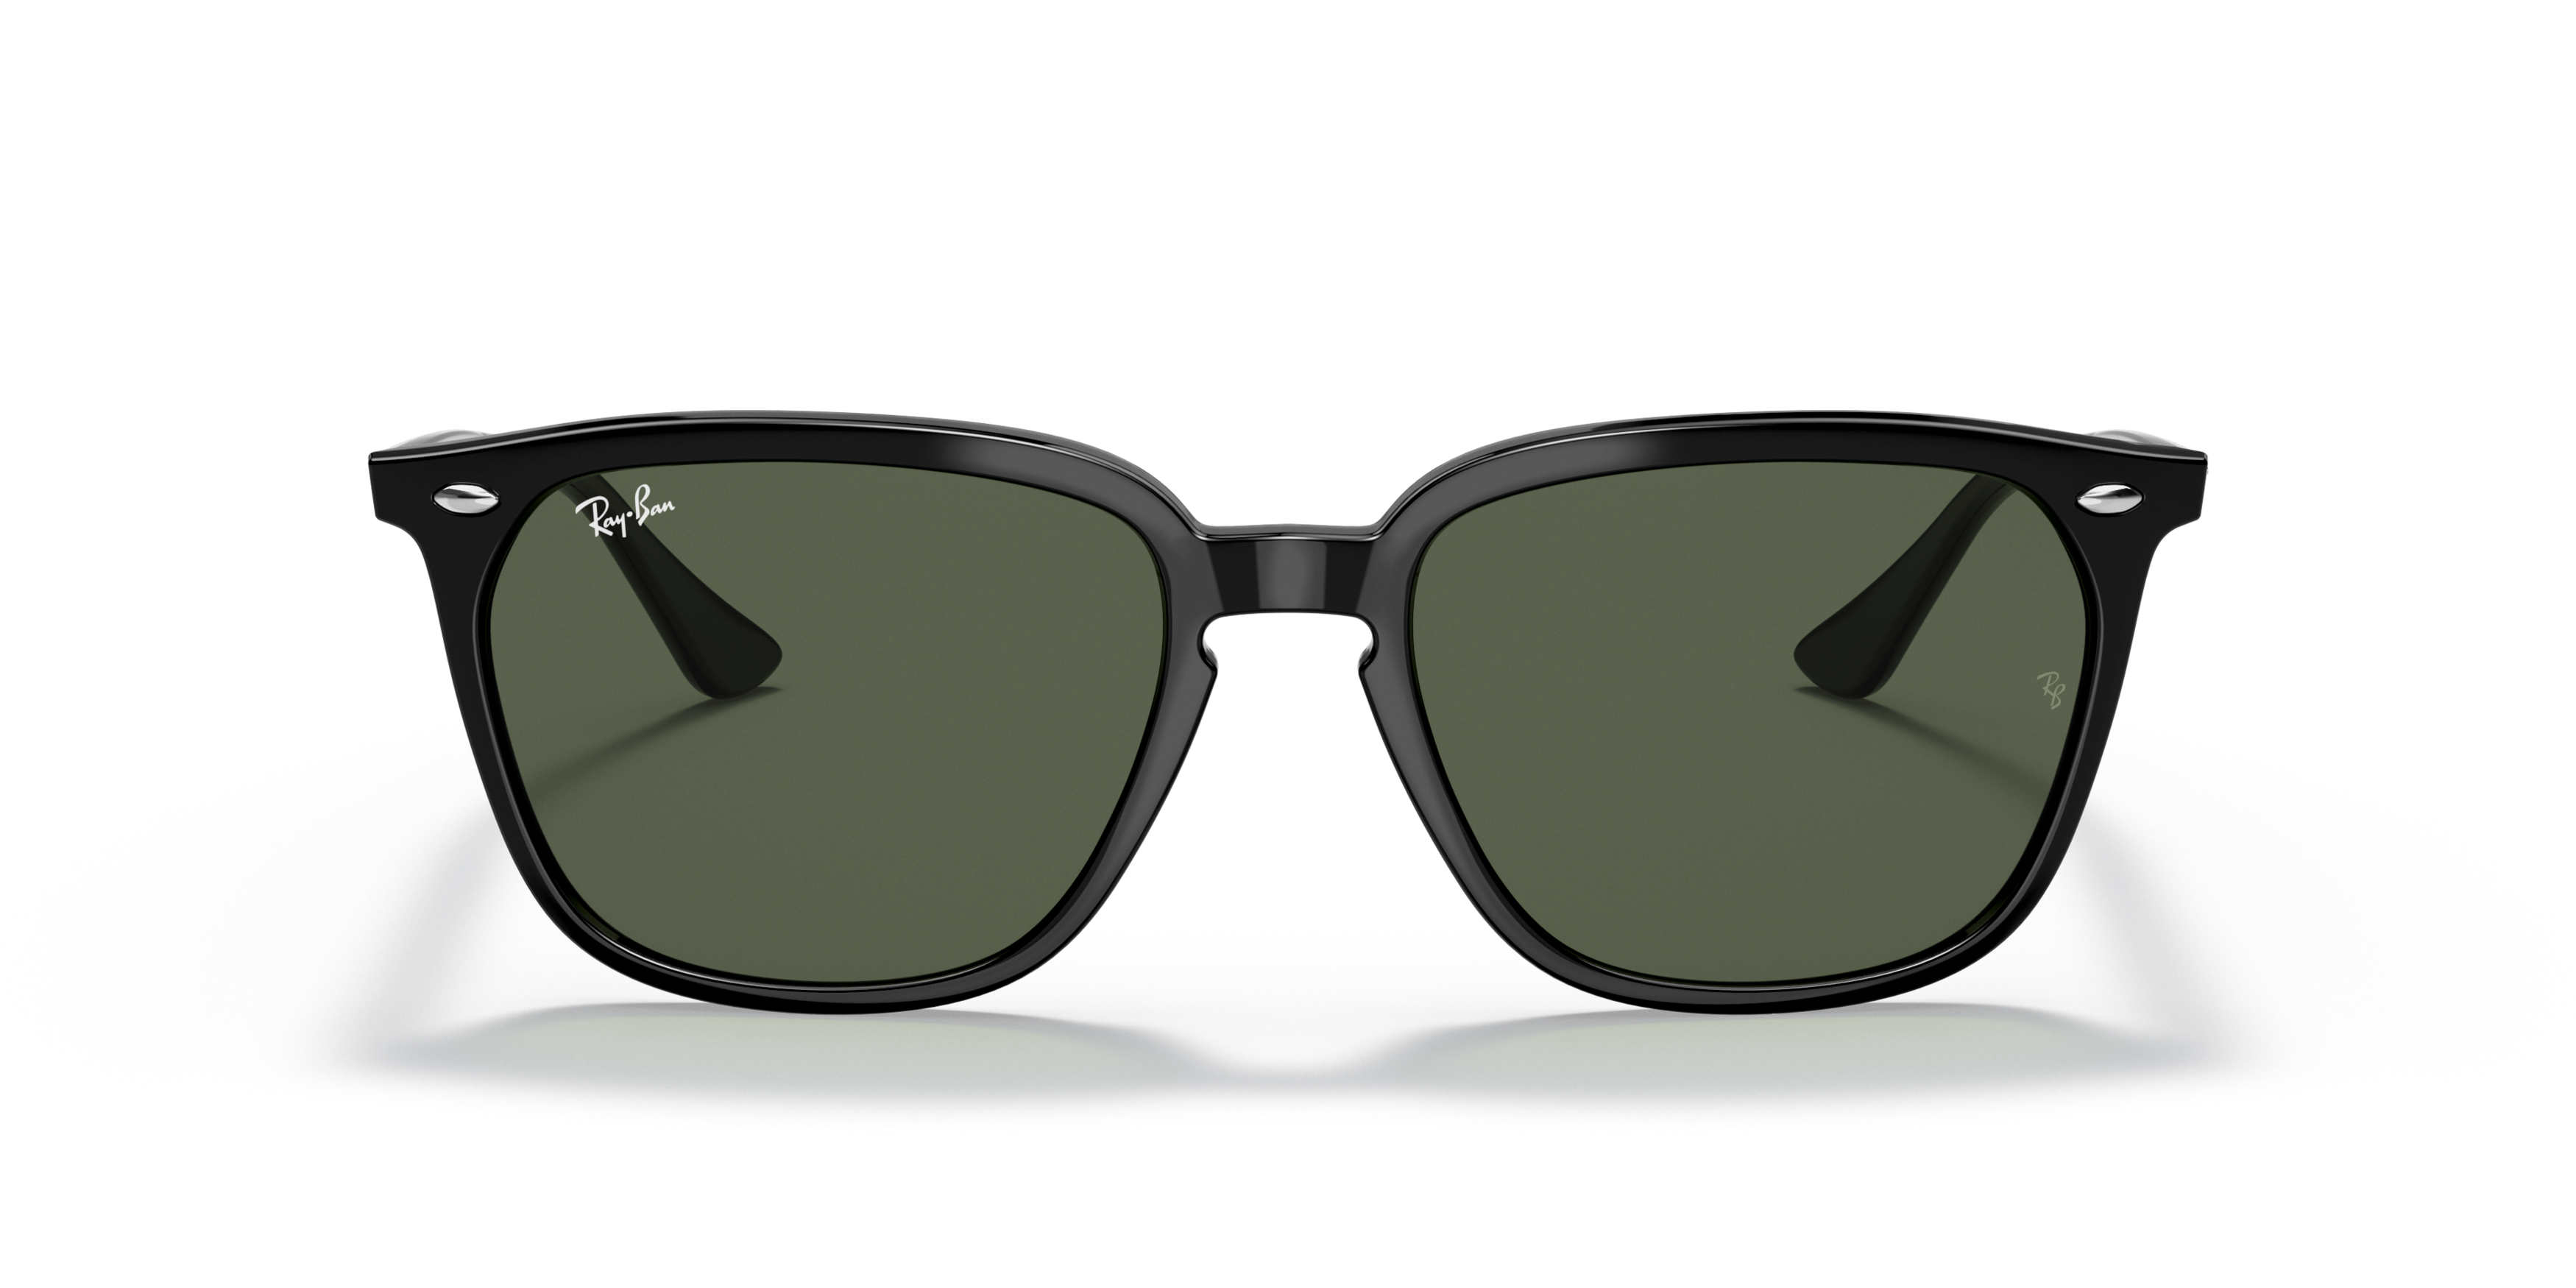 [products.image.front] RAY-BAN RB4362 601/71